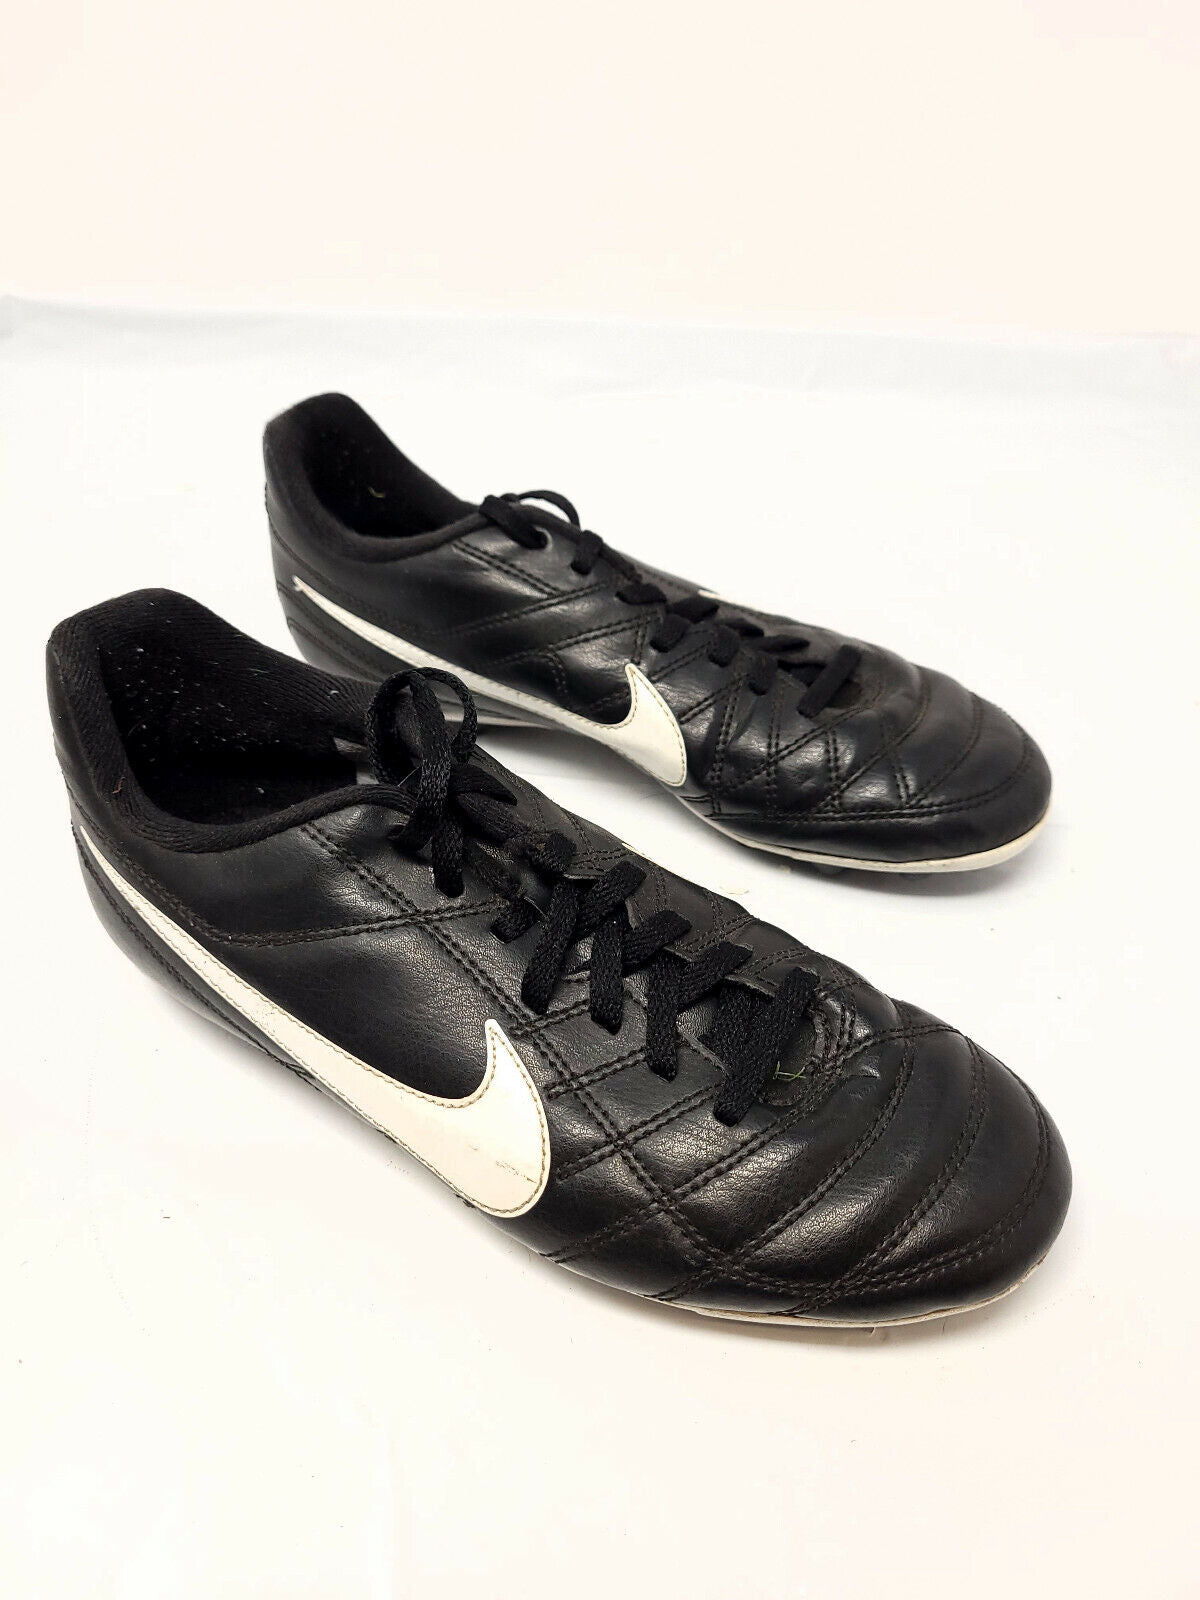 Boys Nike (599072-010) Cleats - Black and white Football -  Size 4.5 - Pre-owned